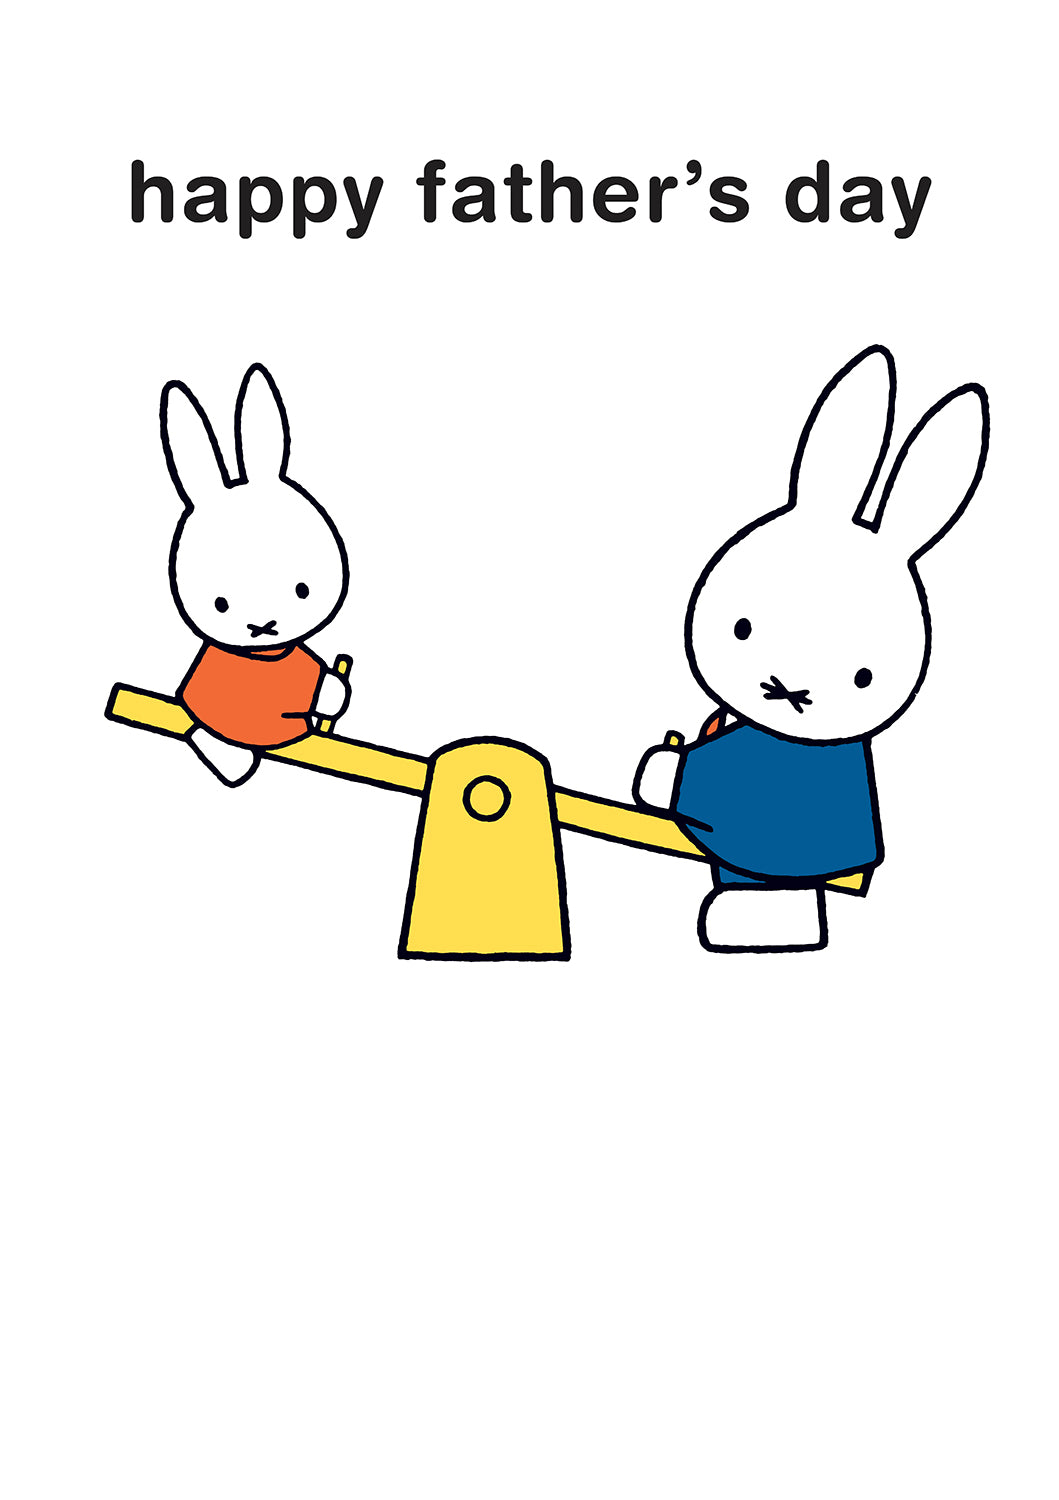 Greeting Card: Miffy - Father's Day